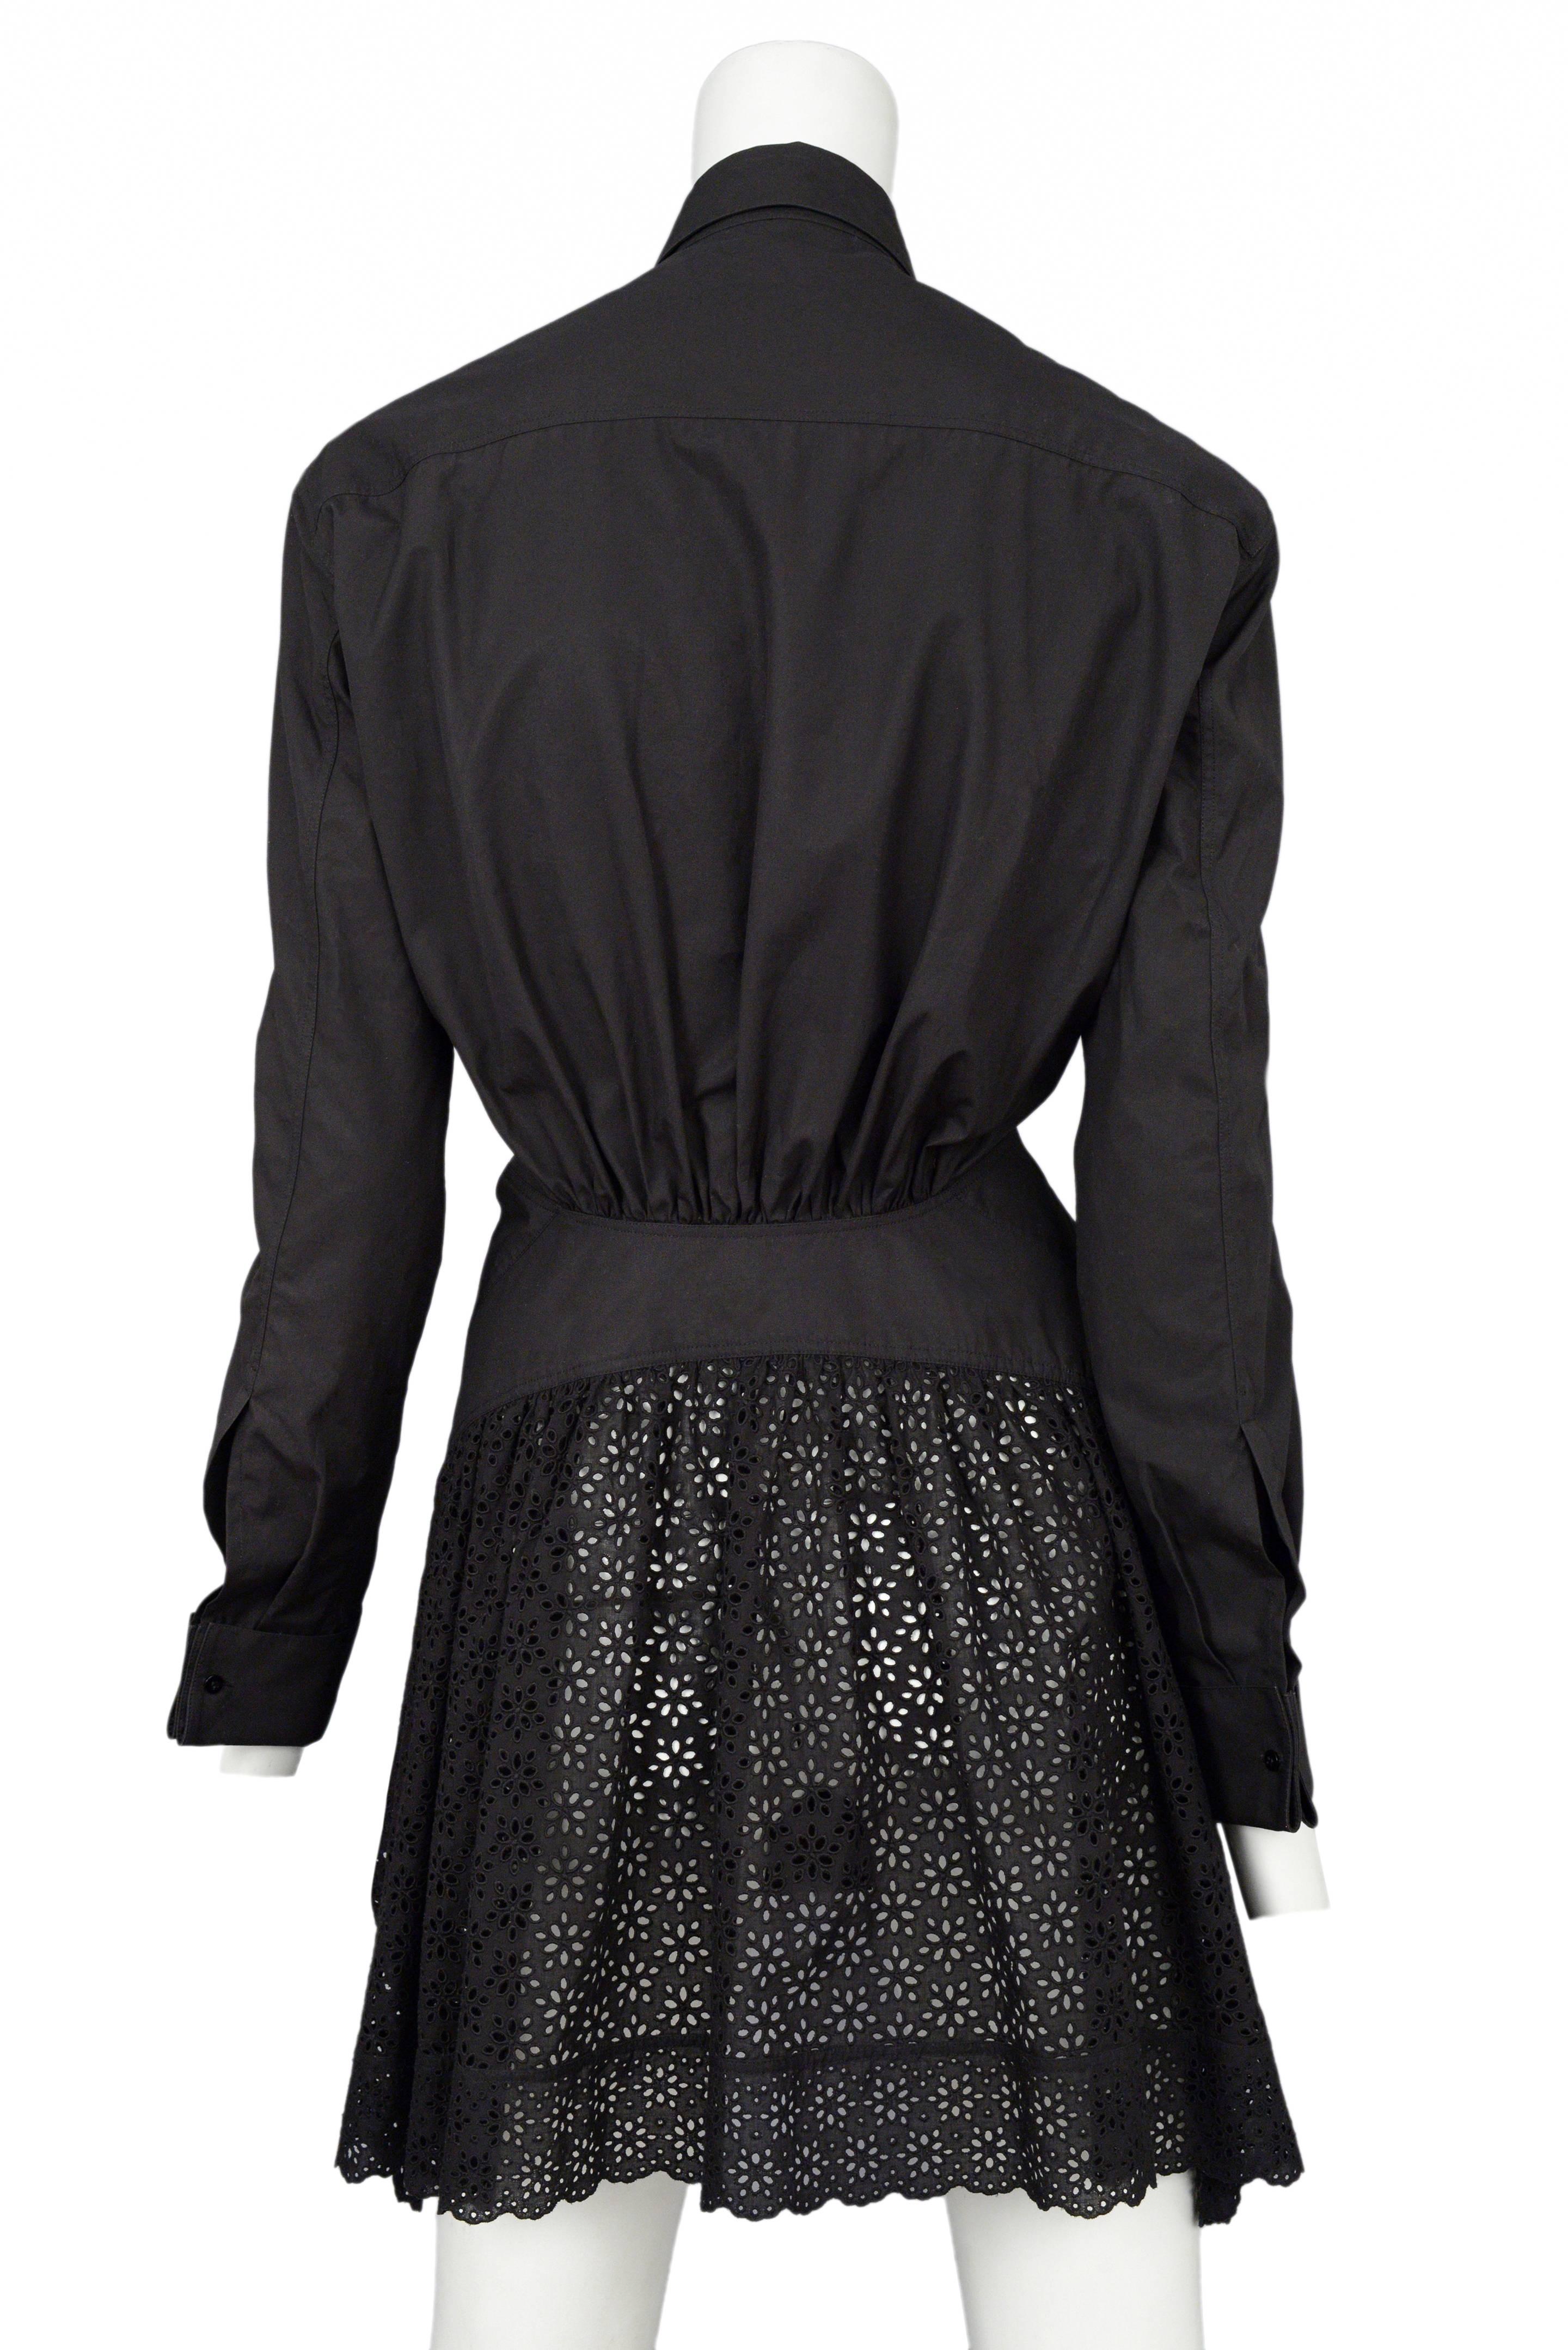 Azzedine Alaia black cotton button down top with eyelet back panel.
Please inquire for additional images.